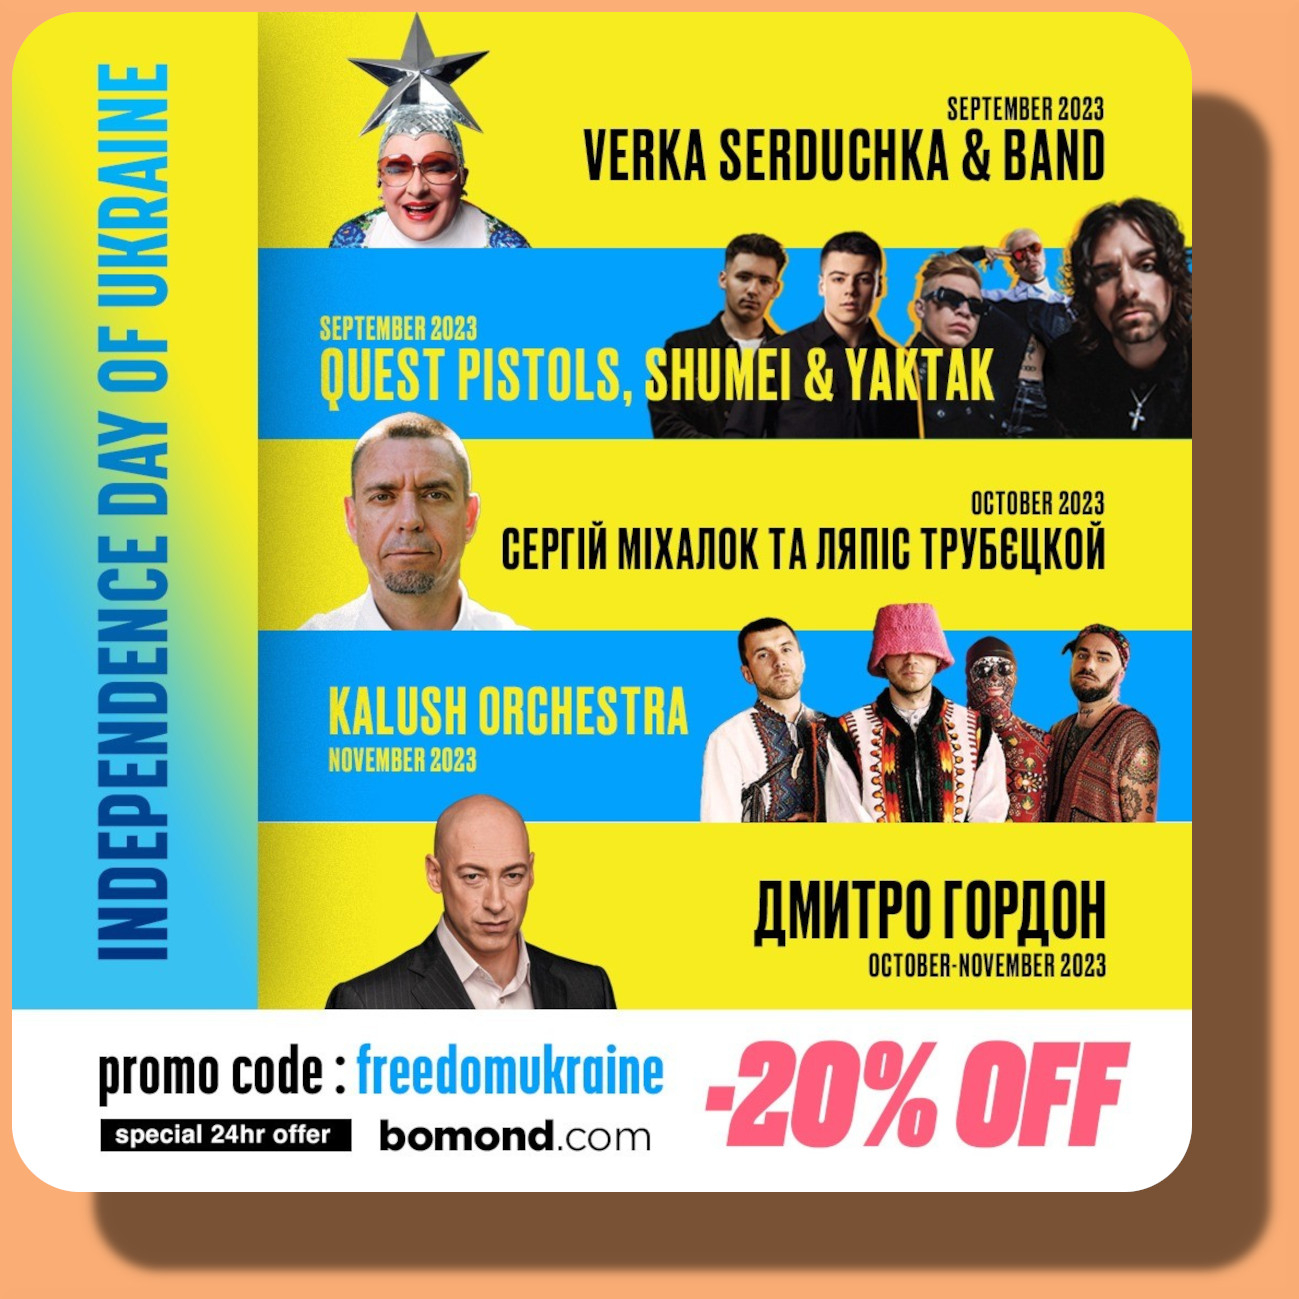 Exclusive Offer: Get 20% Off Concert Tickets!